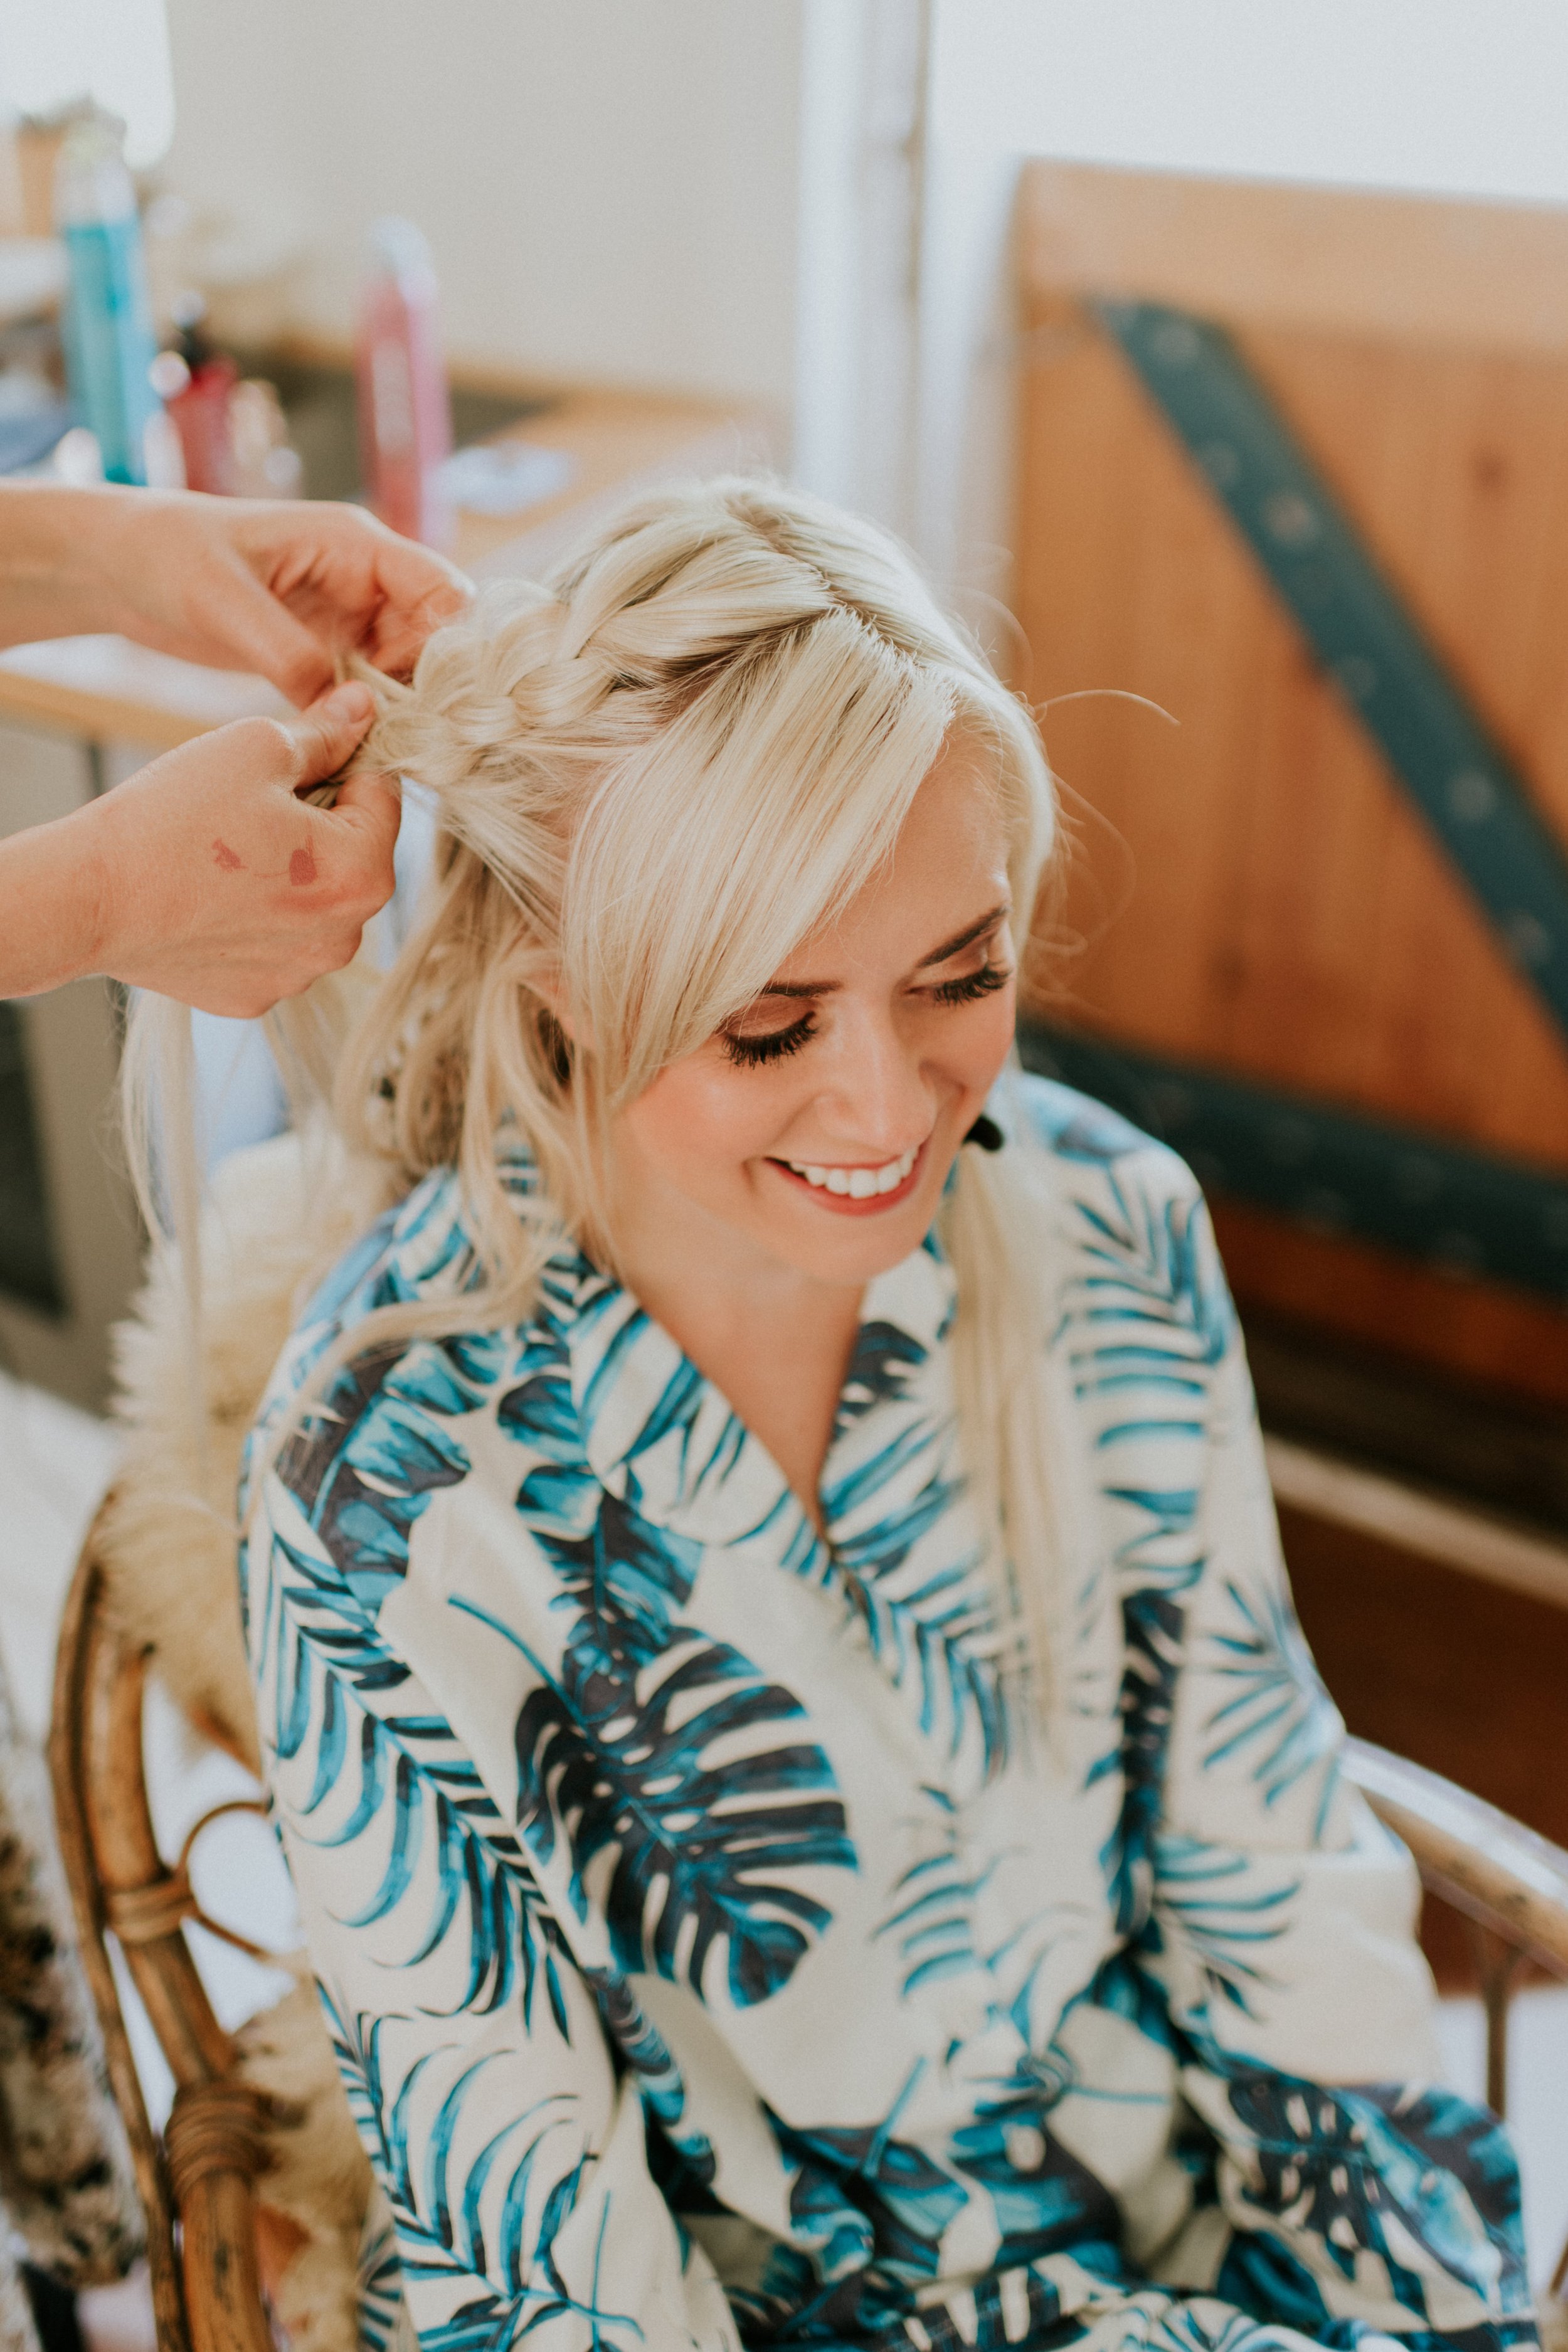 hair and makeup for brides | full-service destination wedding | get married in Denmark | Aero Island | Danish Island Weddings | Denmark wedding planners and venue